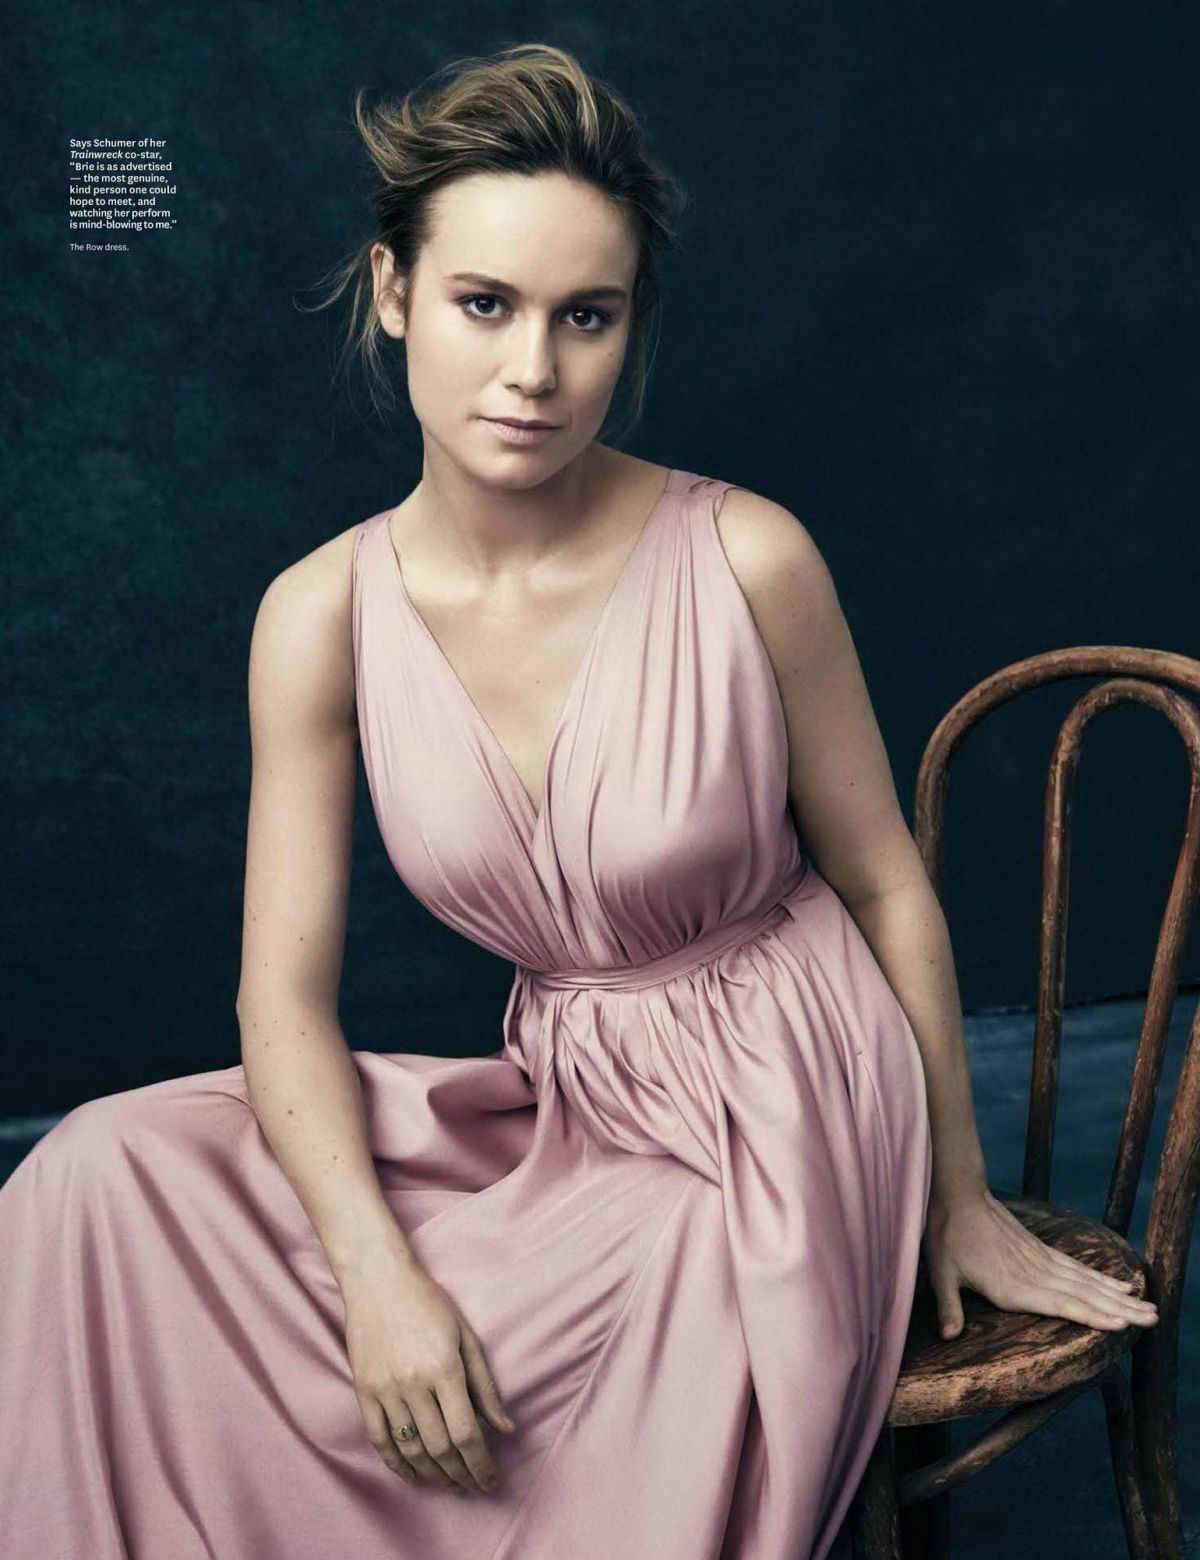 Brie Larson For The Hollywood Reporter Magazine Wallpapers